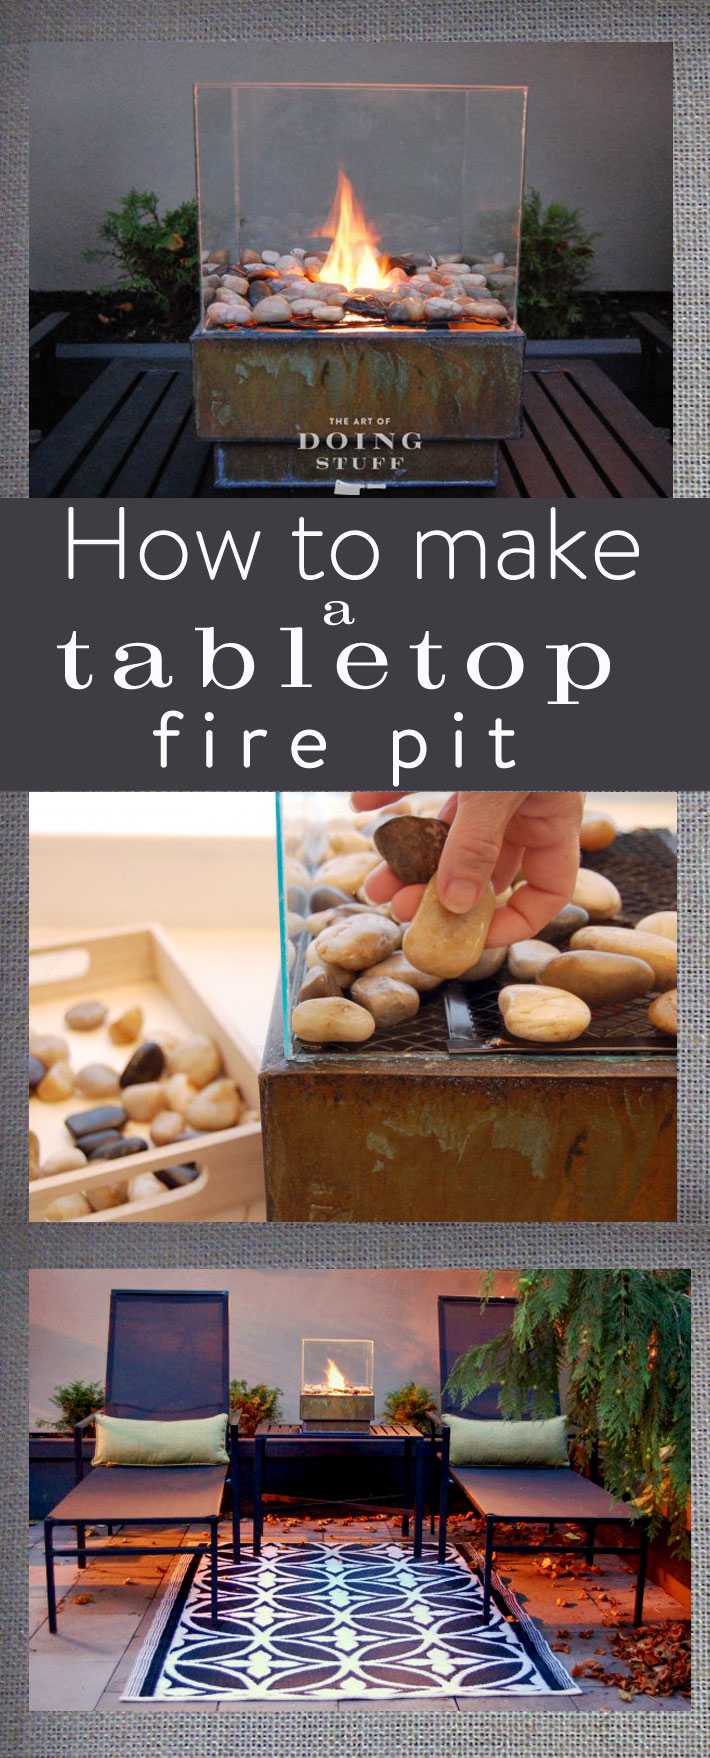 If you're short on space, this tabletop fire pit is perfect for you. Learn how to make it at The Art of Doing Stuff